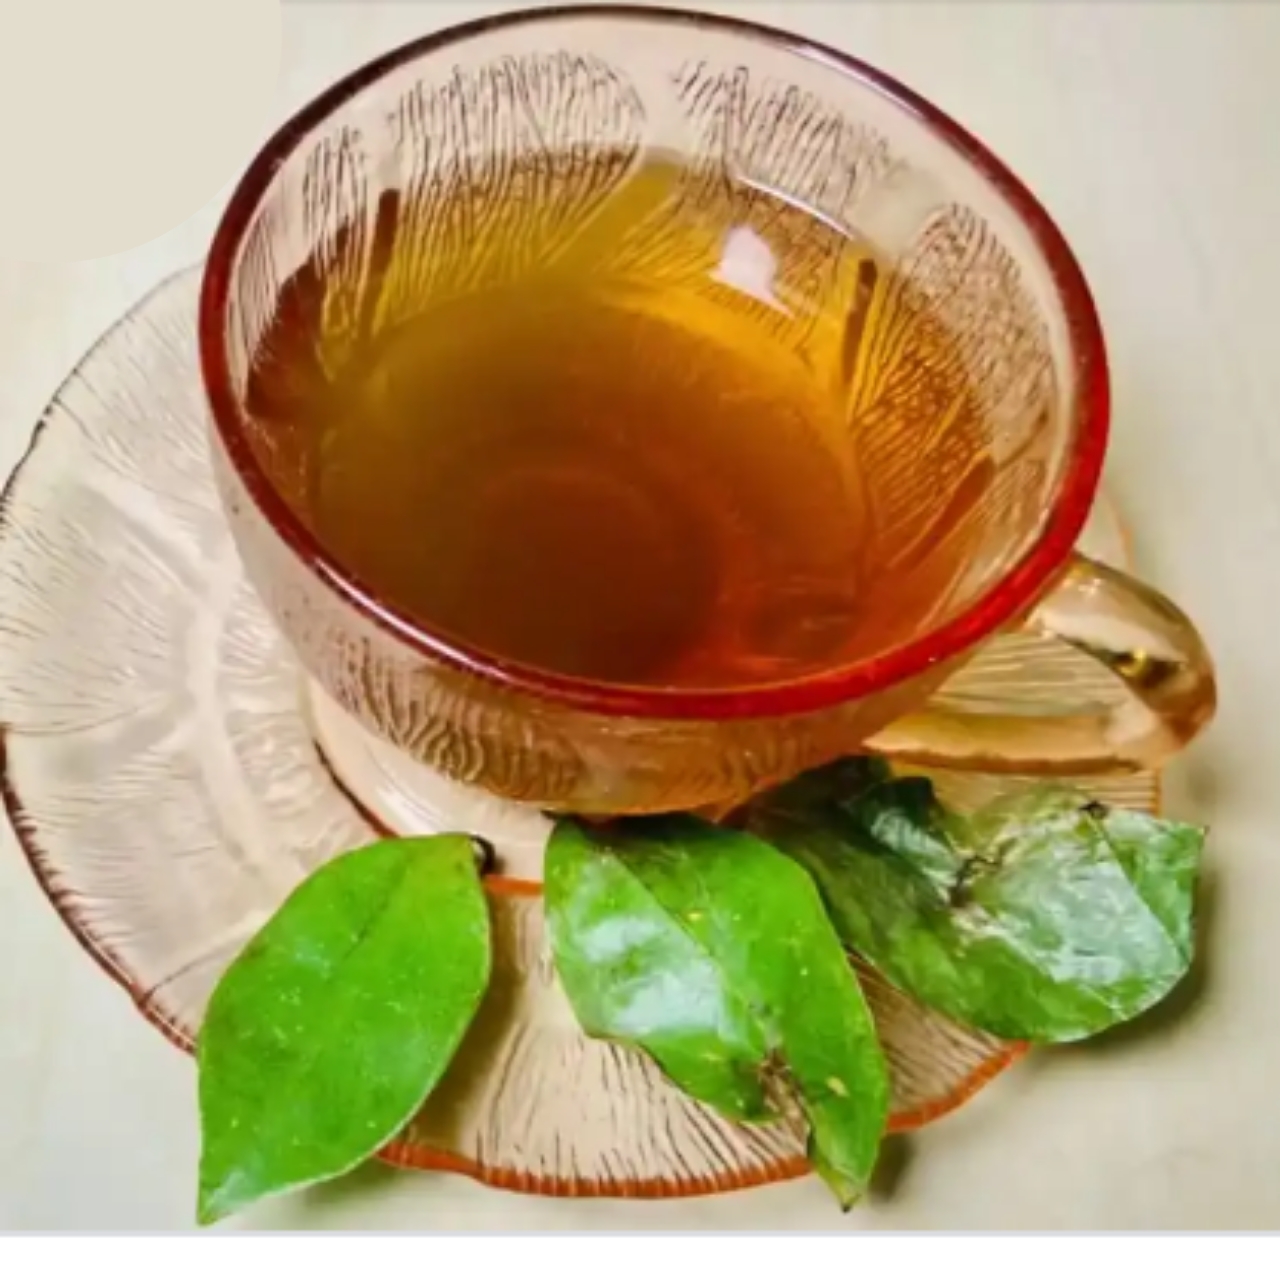 What is soursop leaves tea good for?